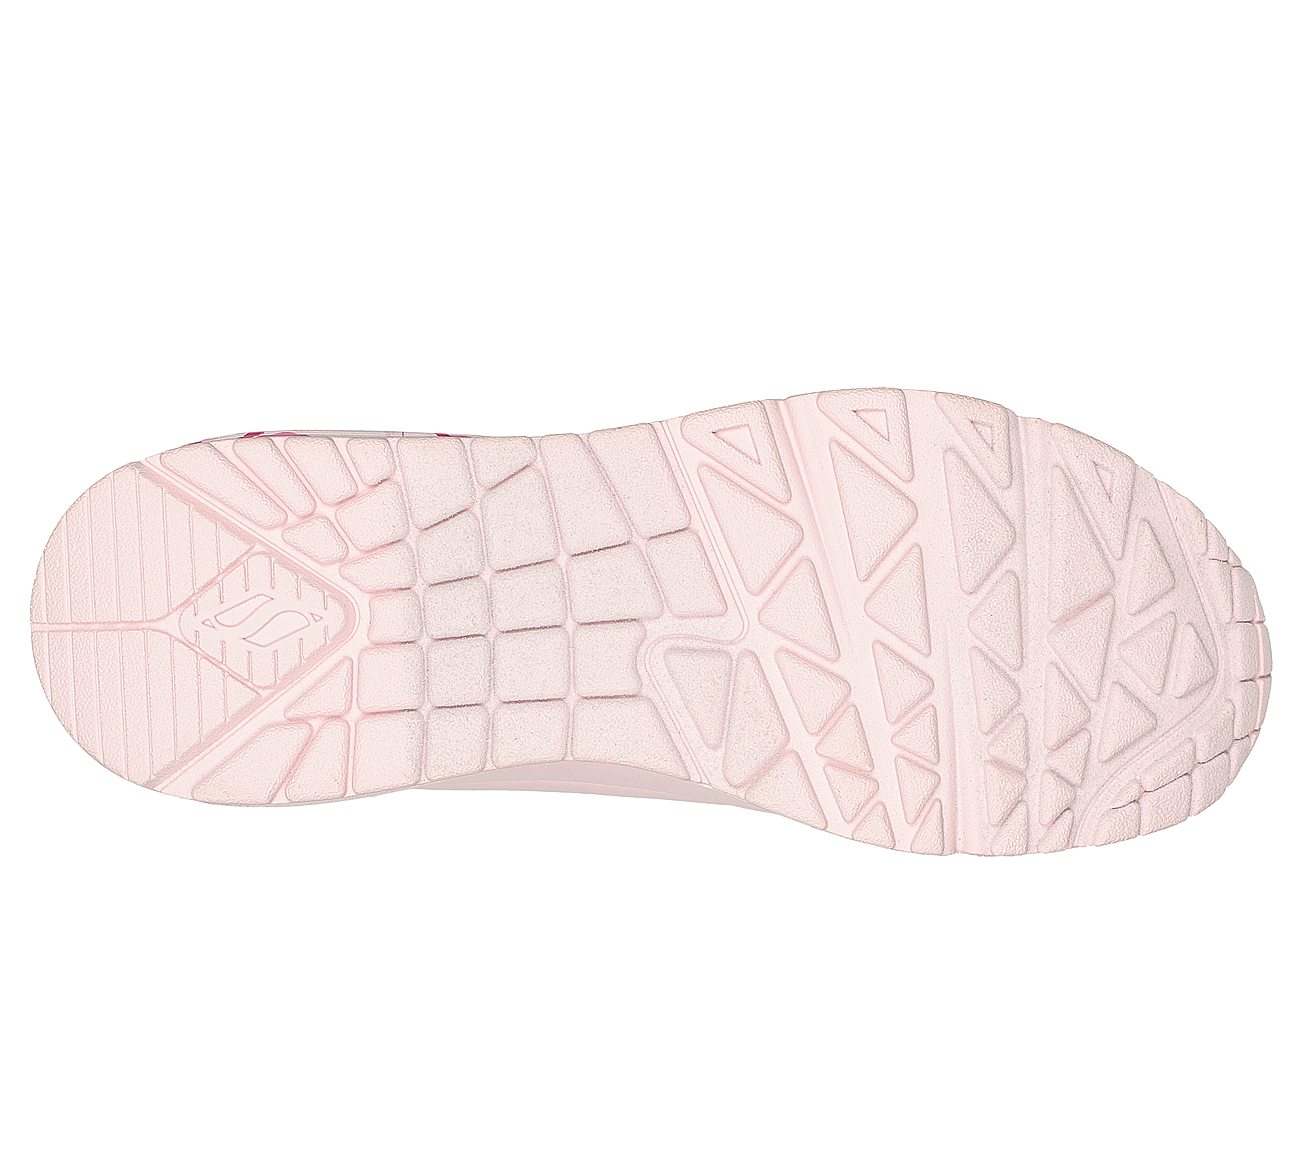 UNO - SPREAD THE LOVE, LLLIGHT PINK Footwear Bottom View